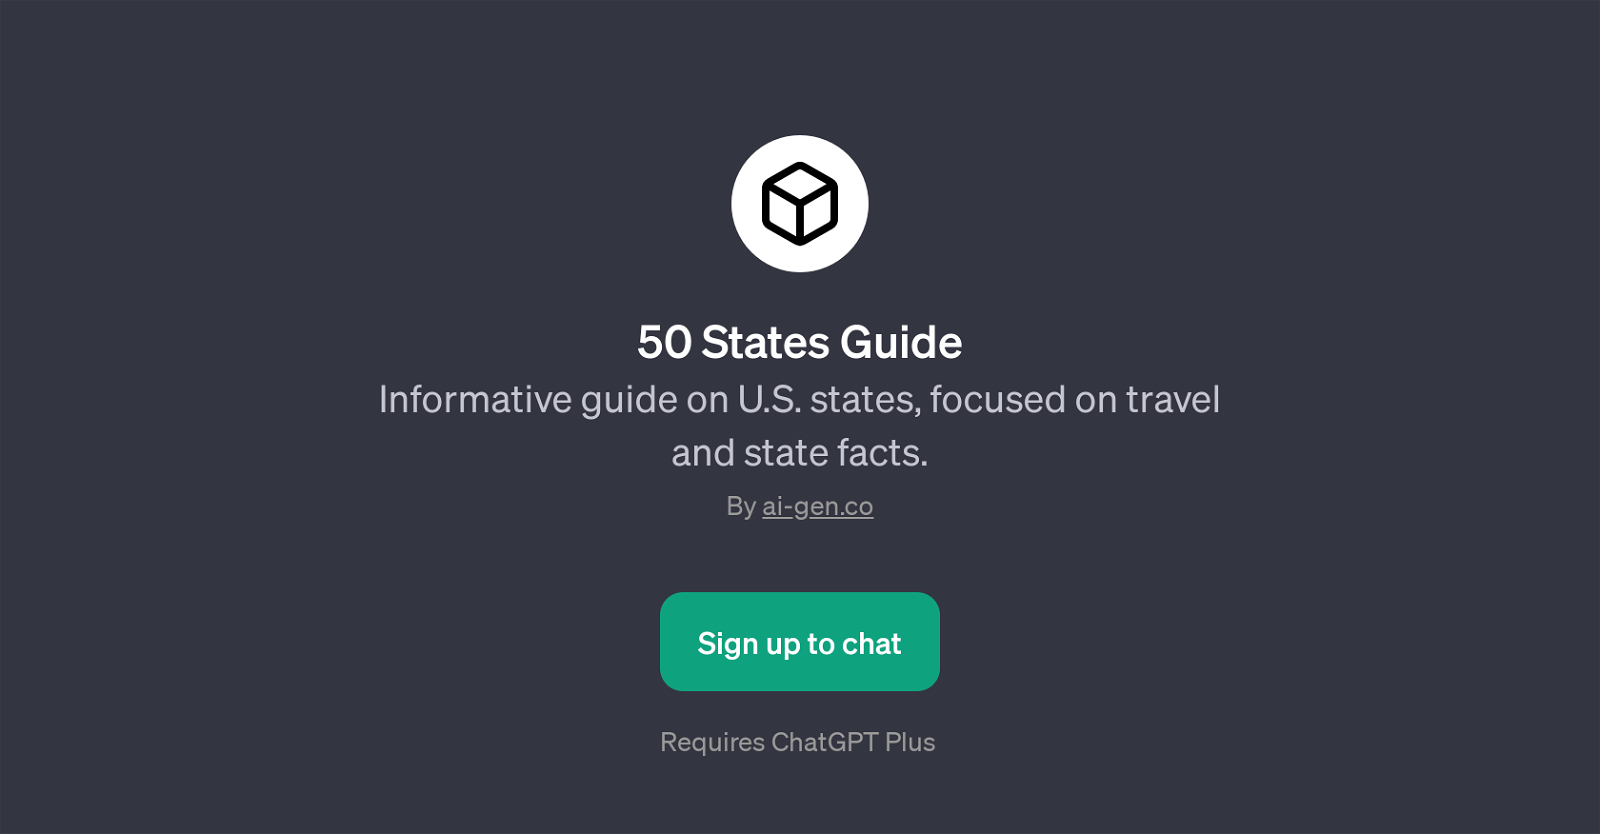 50 States Guide website